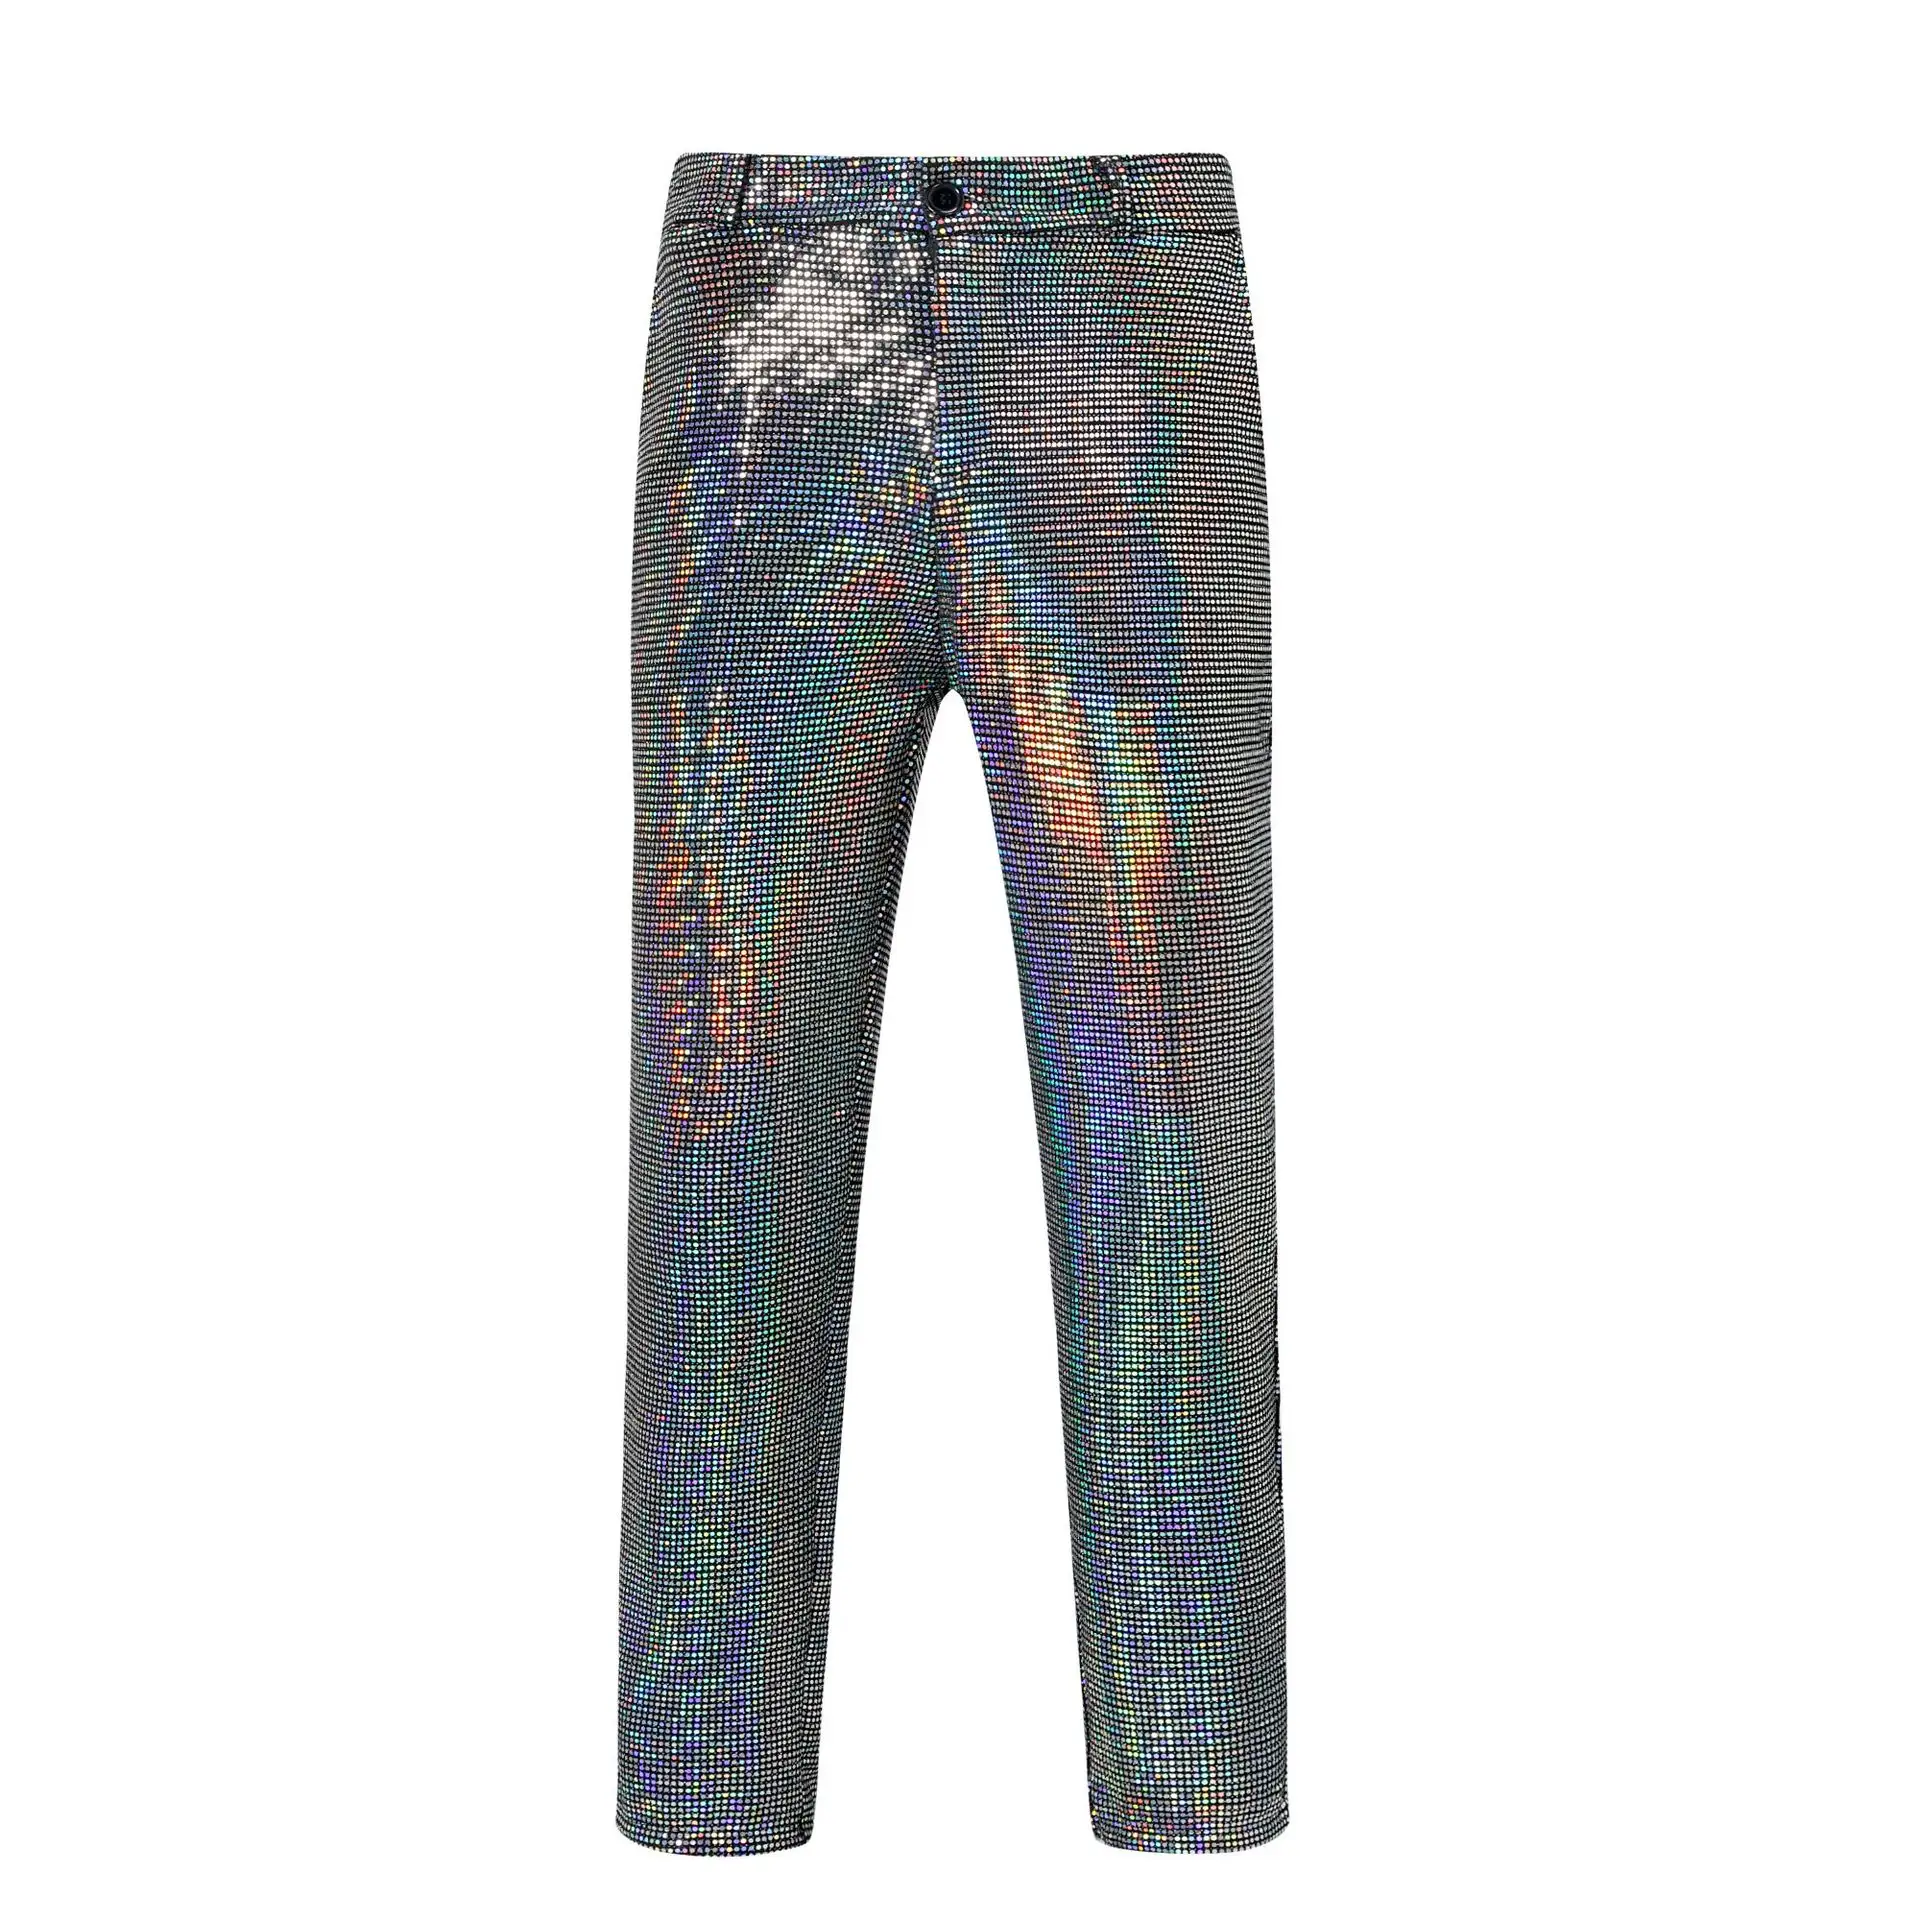 Mens metallic pants shiny sequins straight leg trousers for disco costume nightclub party dance 70s